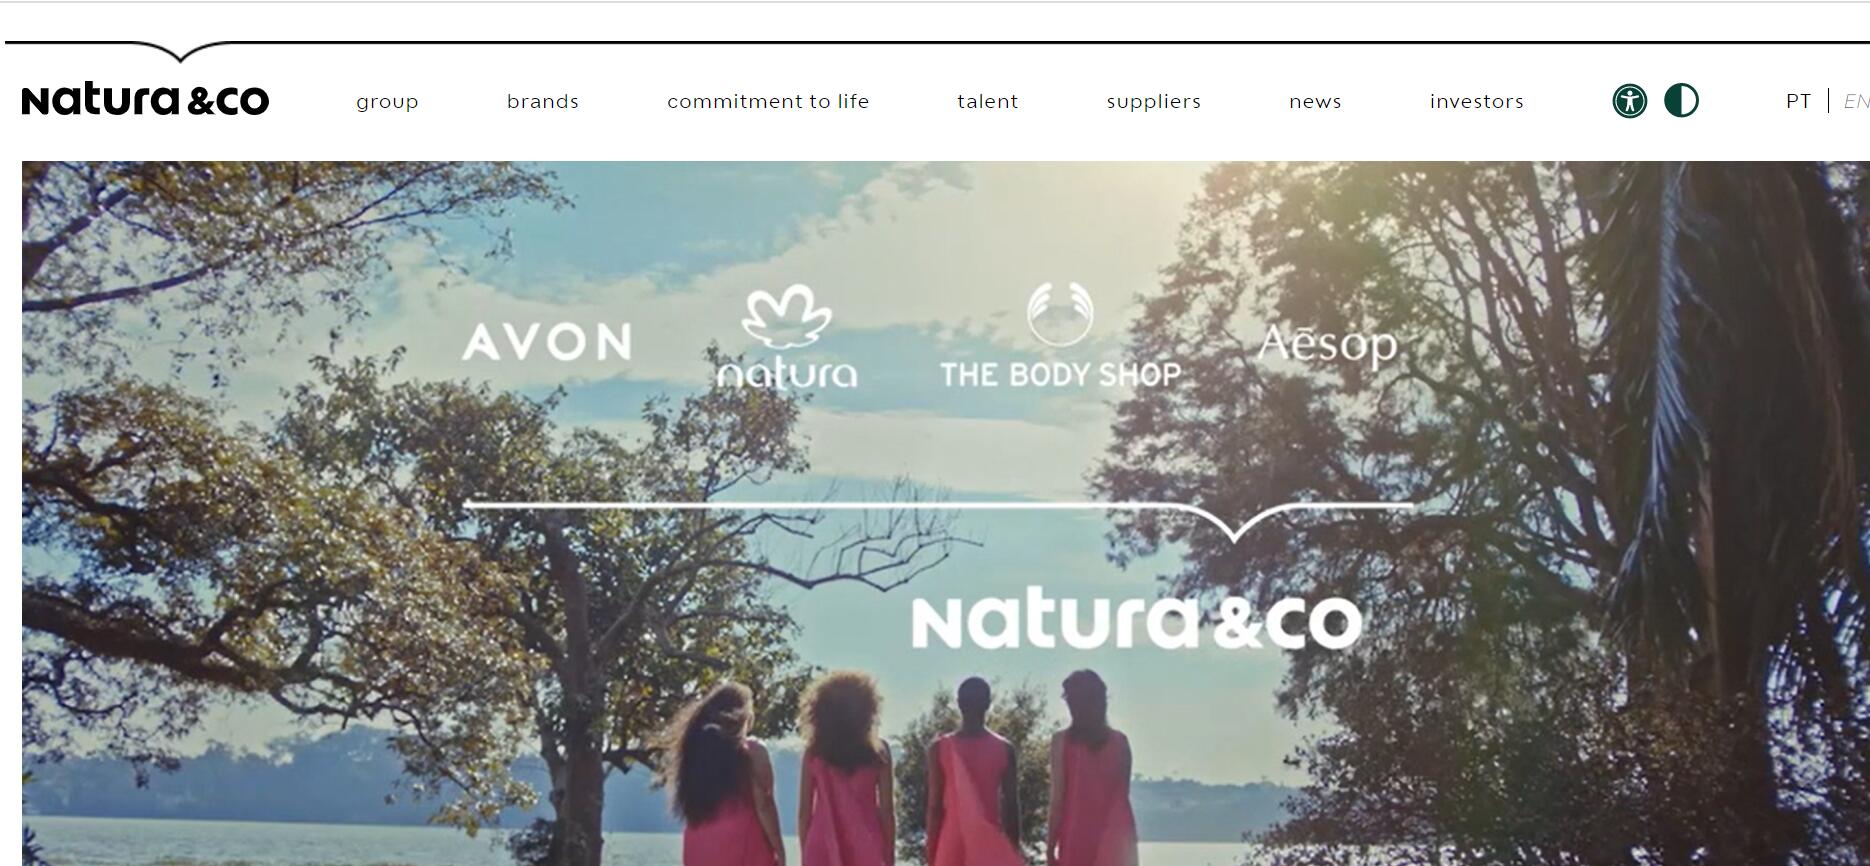 Natura & Co’s Revenue Fell 10% to BRL 36.35 Billion in FY 2022, with Aesop Successfully Entering China in Q4